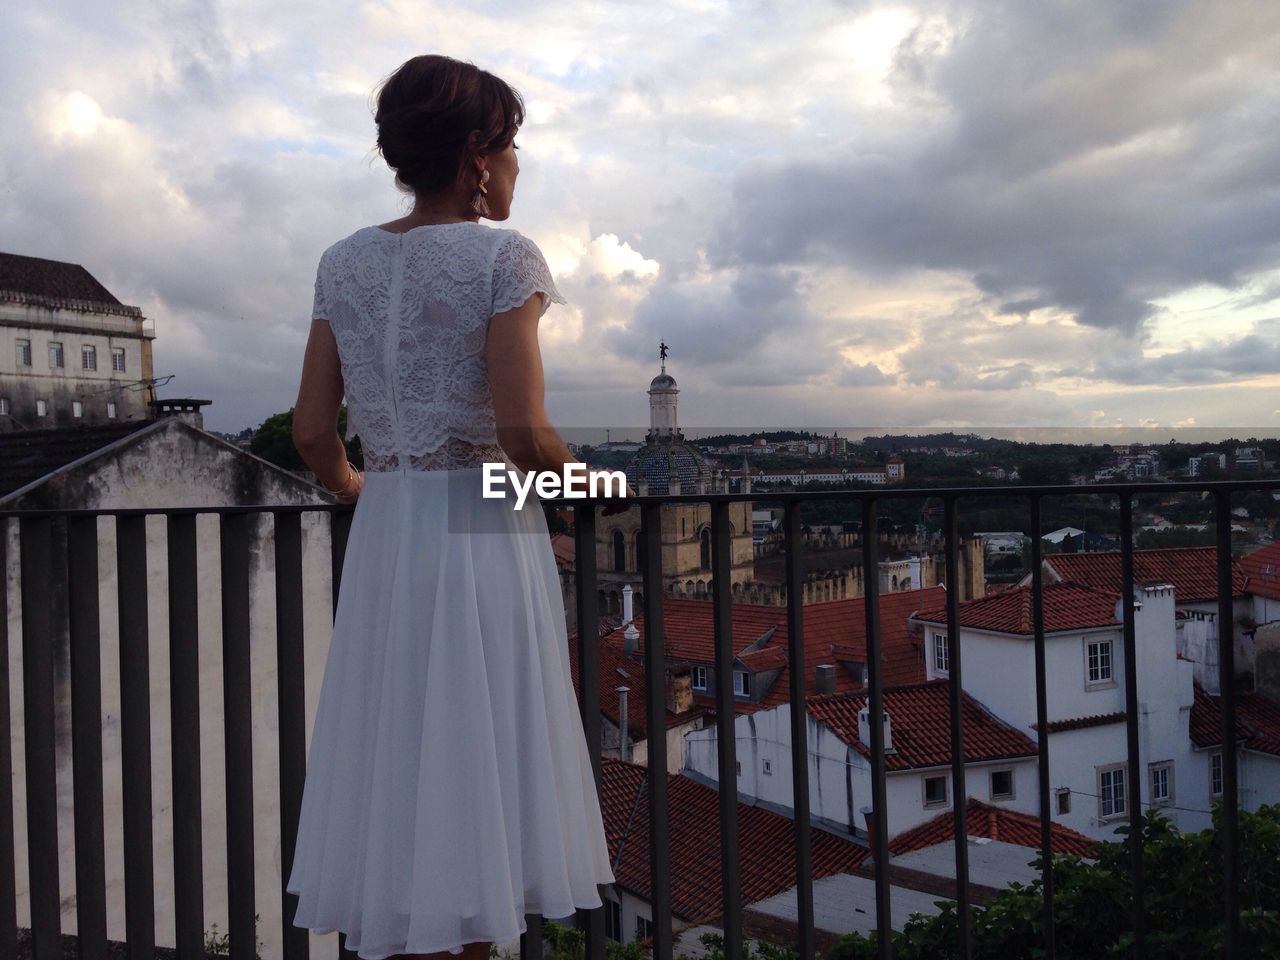 Rear view of young woman standing in balcony overlooking townscape against cloudy sky